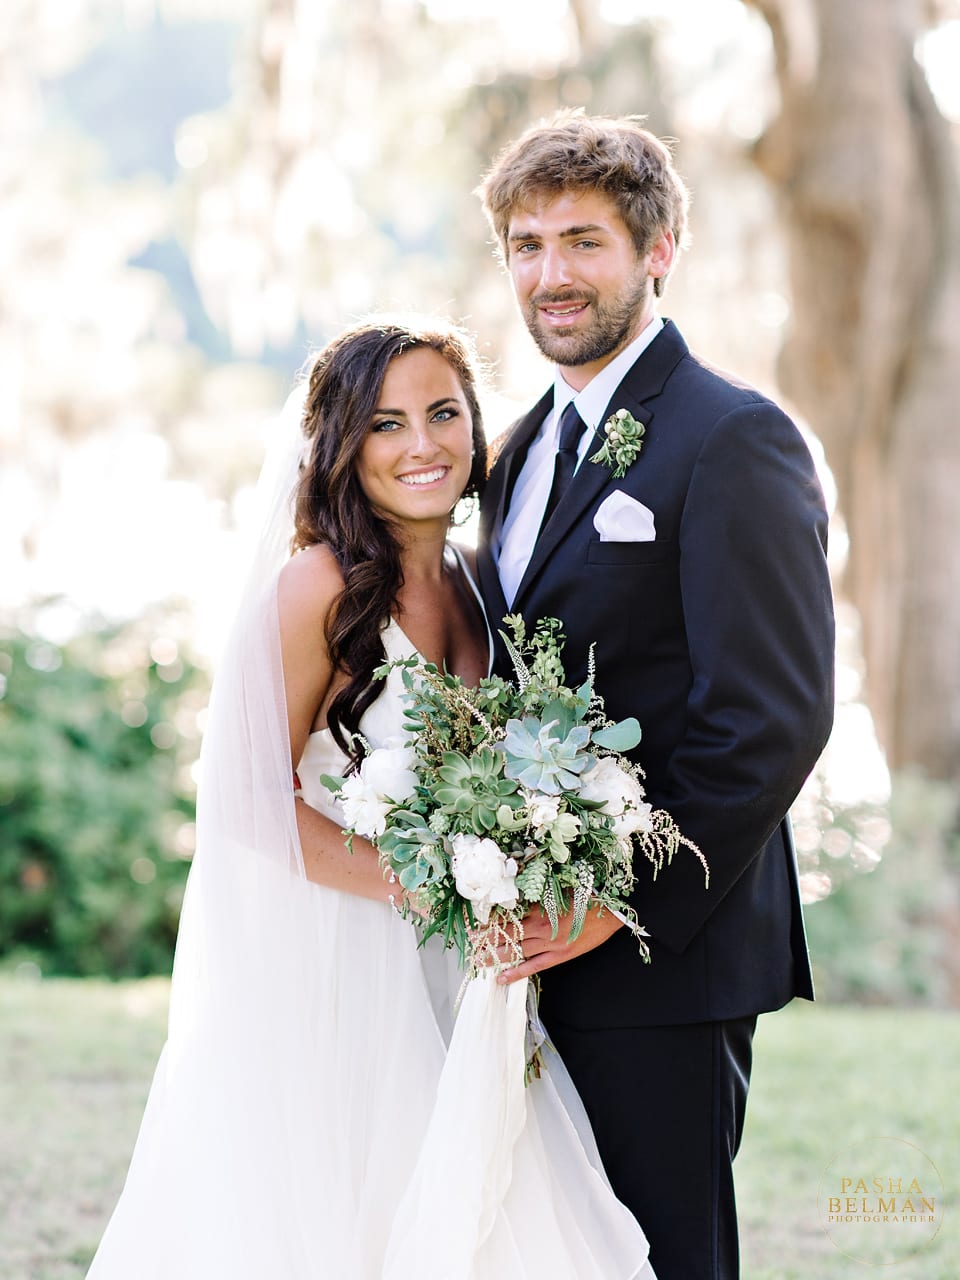 A Beautiful Wedding at Wachesaw Plantation by Pasha Belman photography. Bride and Groom Poses and ideas